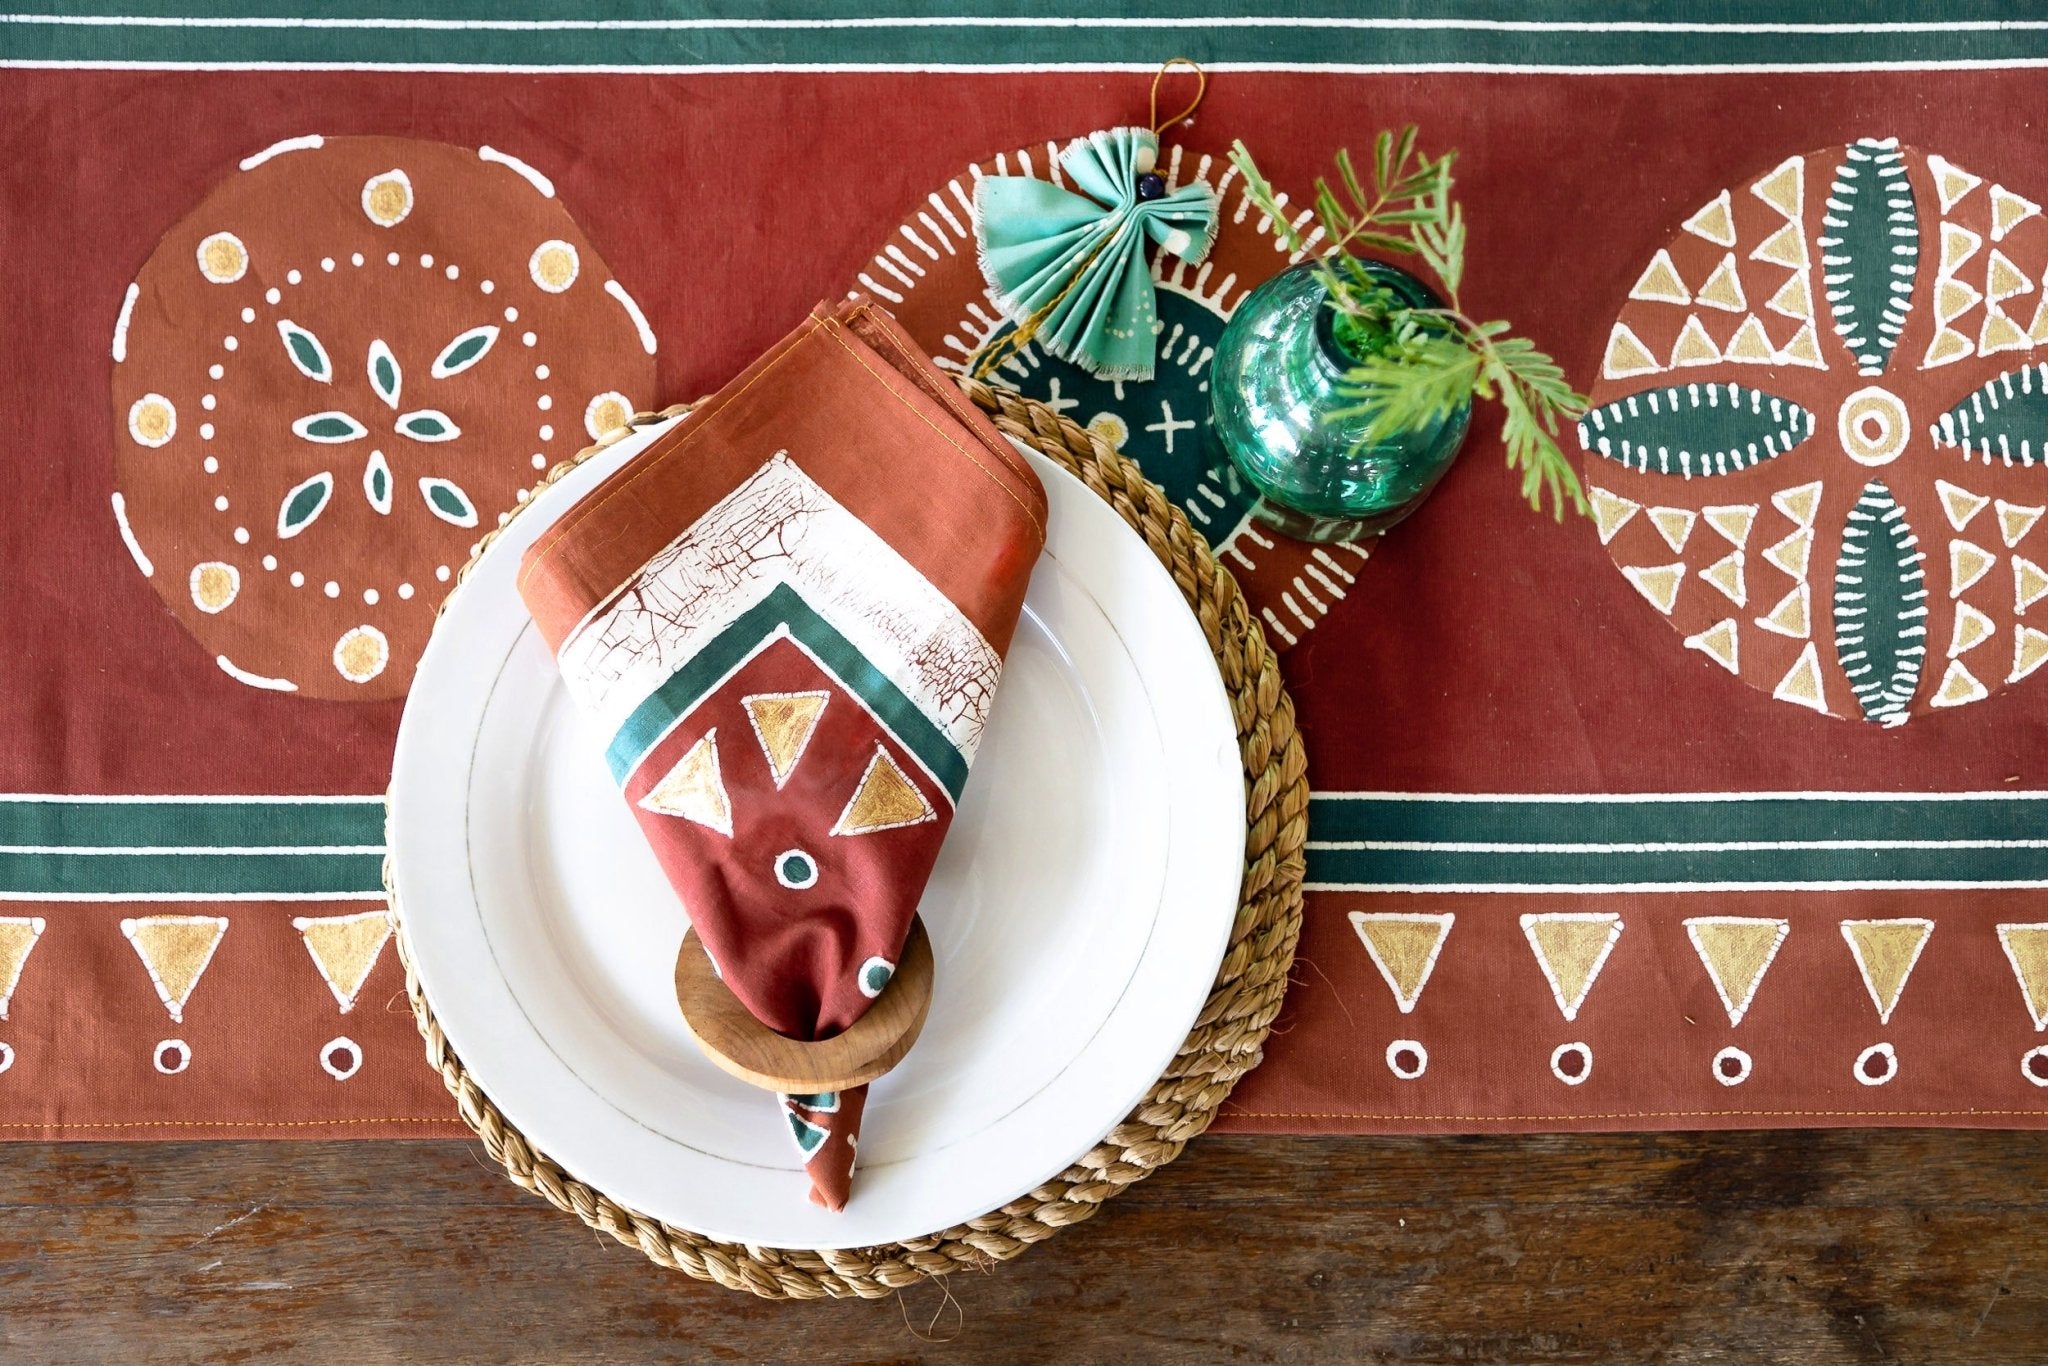 Kuosi Festive Napkin Set - Hand Painted by TRIBAL TEXTILES - Handcrafted Home Decor Interiors - African Made